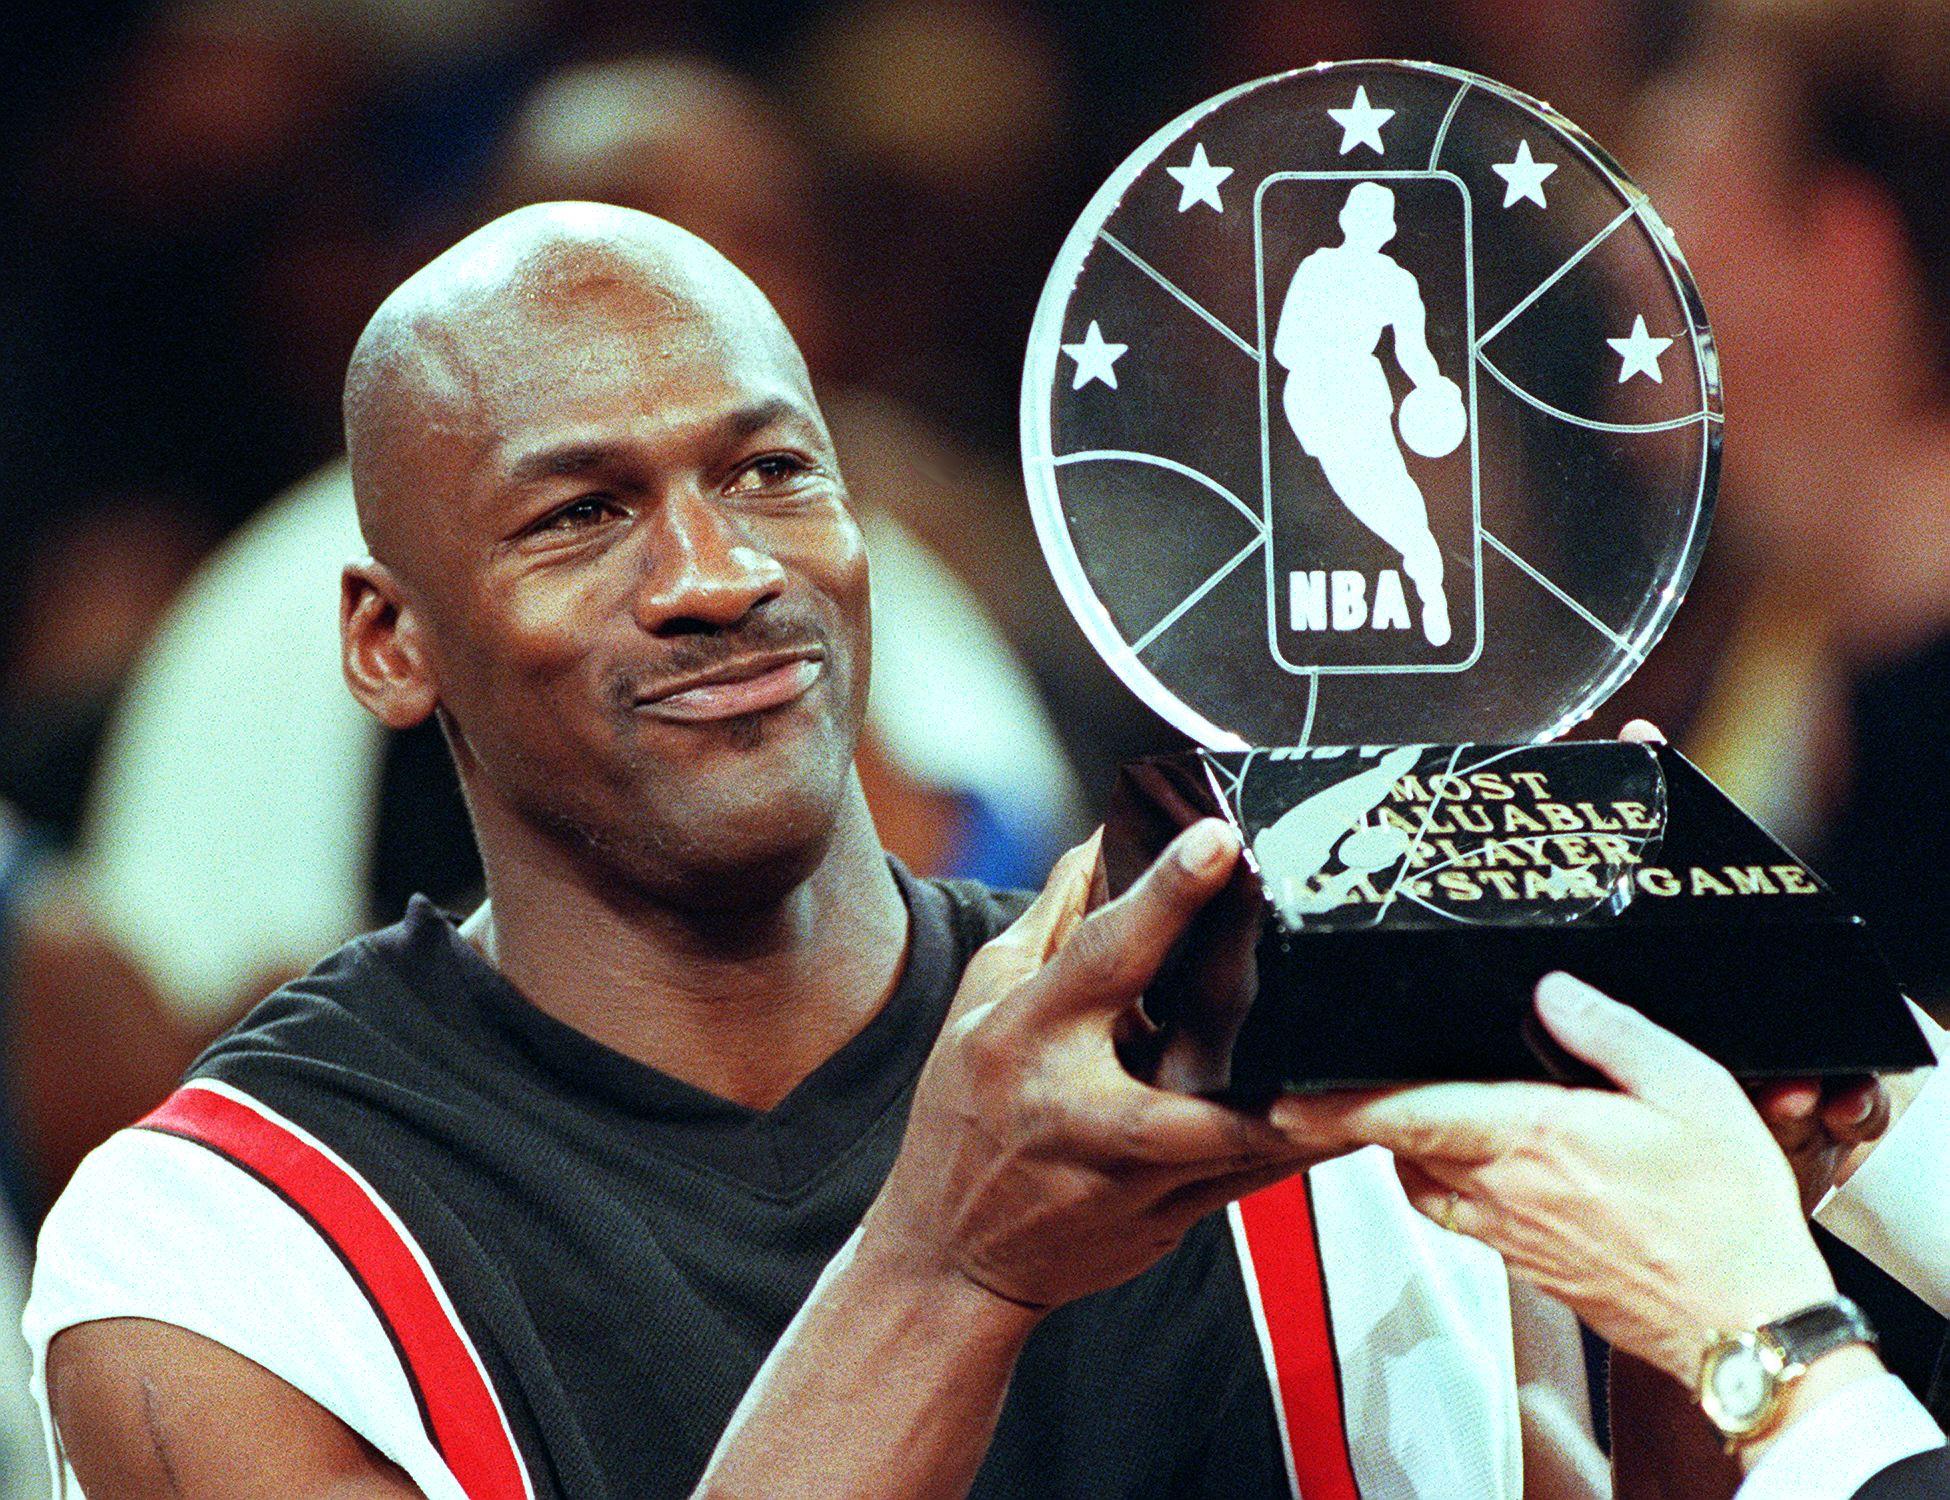 Michael Jordan holds up the Most Valuable Player trophy at Madison Square Garden | Source: Getty Images